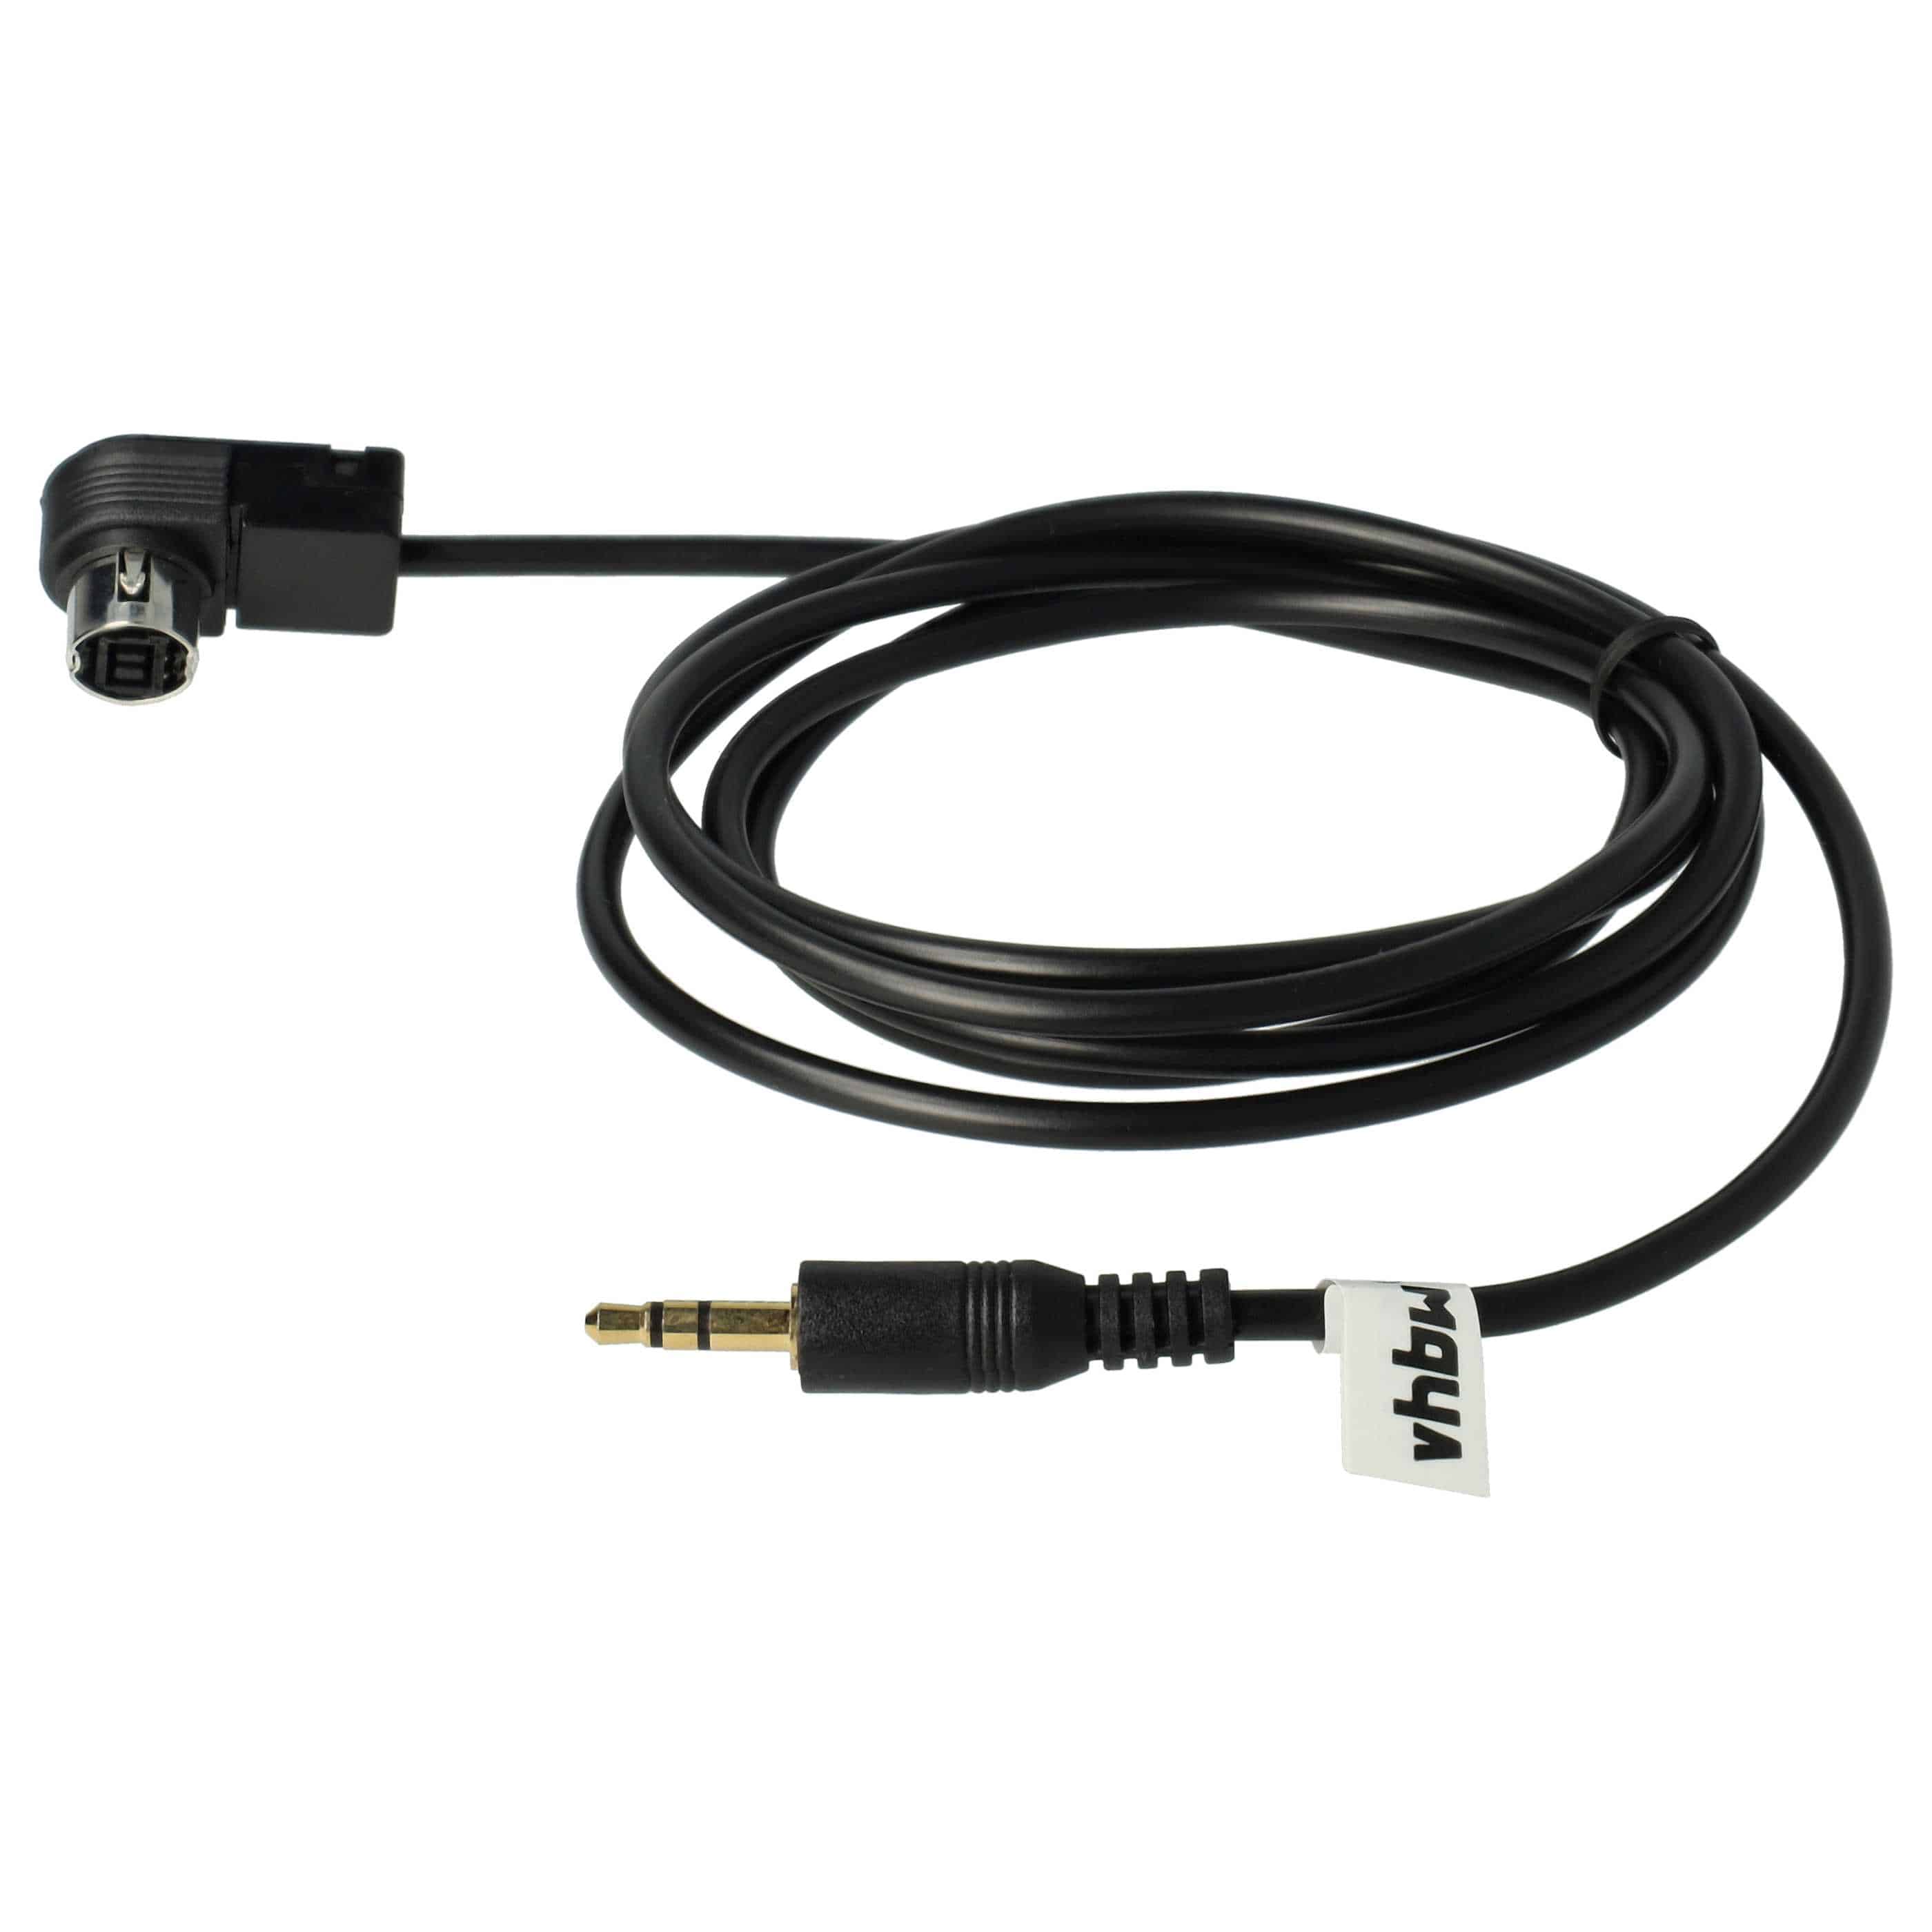 AUX Audio Adapter Cable as Replacement for Alpine KCA-235B Car Radio - 60 cm